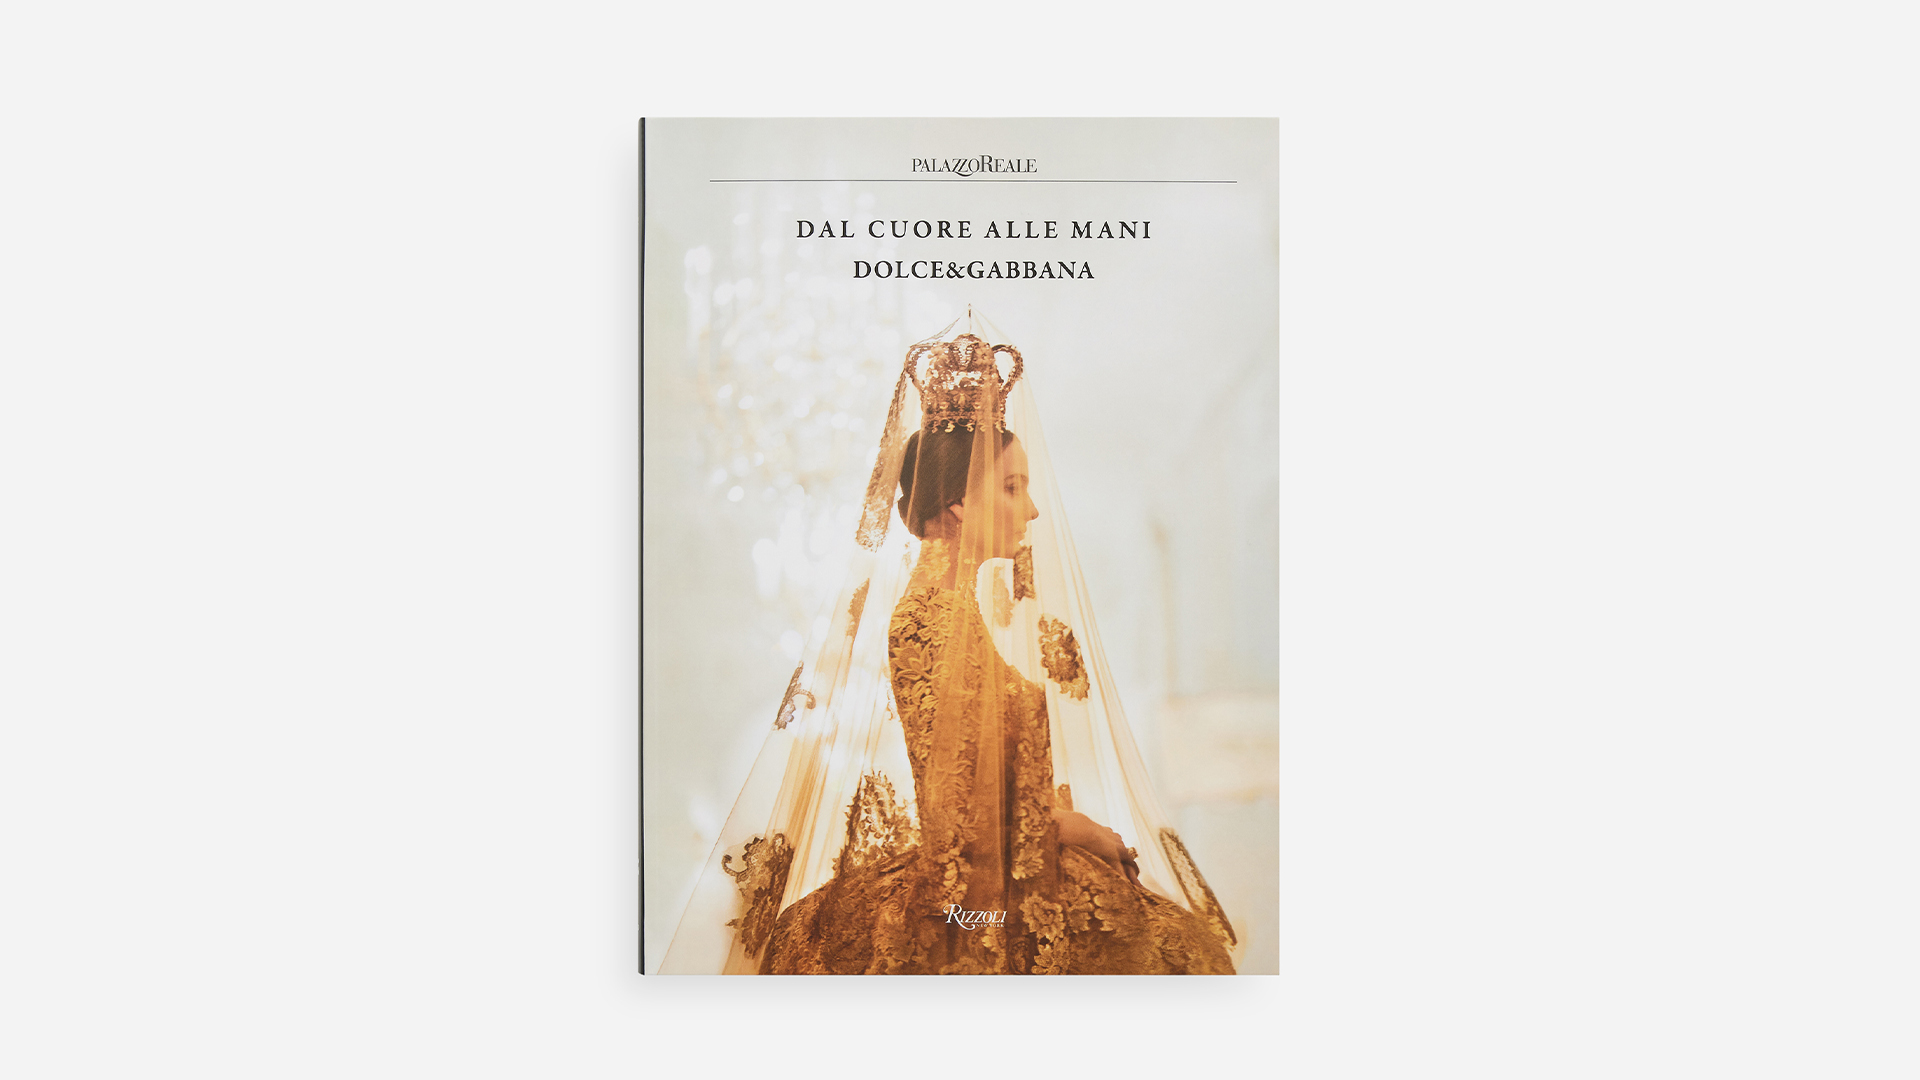 dolce-and-gabbana-dal-cuore-alle-mani-exhibition-book-banner